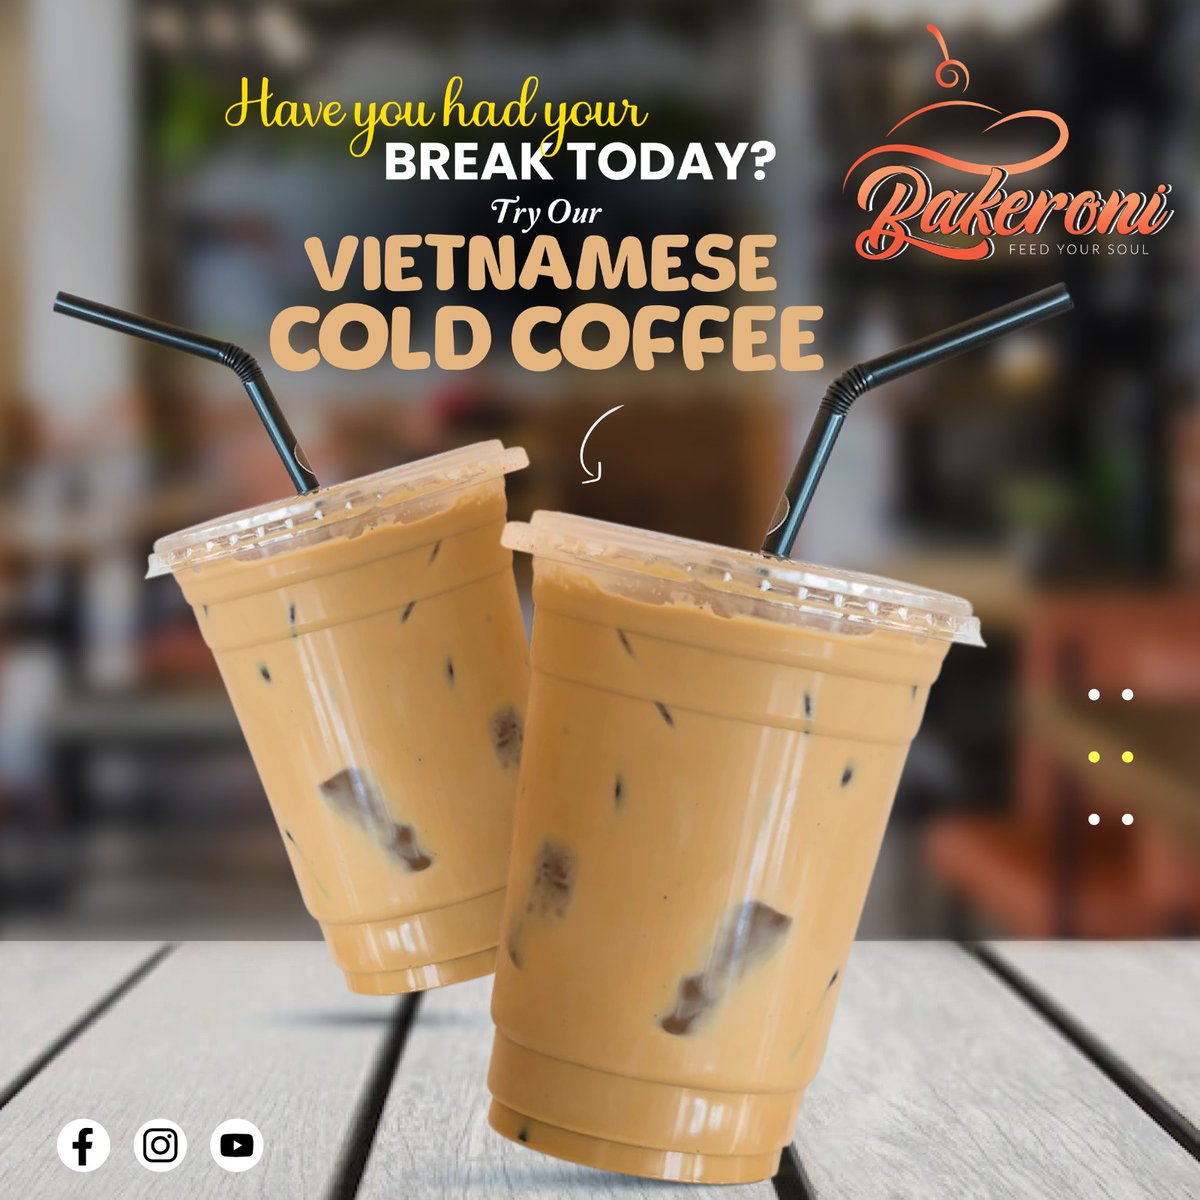 🌟 BREAK TIME with a Twist! 🌟 Enjoy the Bakeroni's refreshing VIETNAMESE COLD COFFEE - the perfect pick-me-up for a scorching day! ☀️🍹 Sip on the exotic flavors of Vietnam and beat the heat in style! 🌴😎 #BakeroniDelights #VietnameseCoccee #ColdBeverages #RefreshingTreat